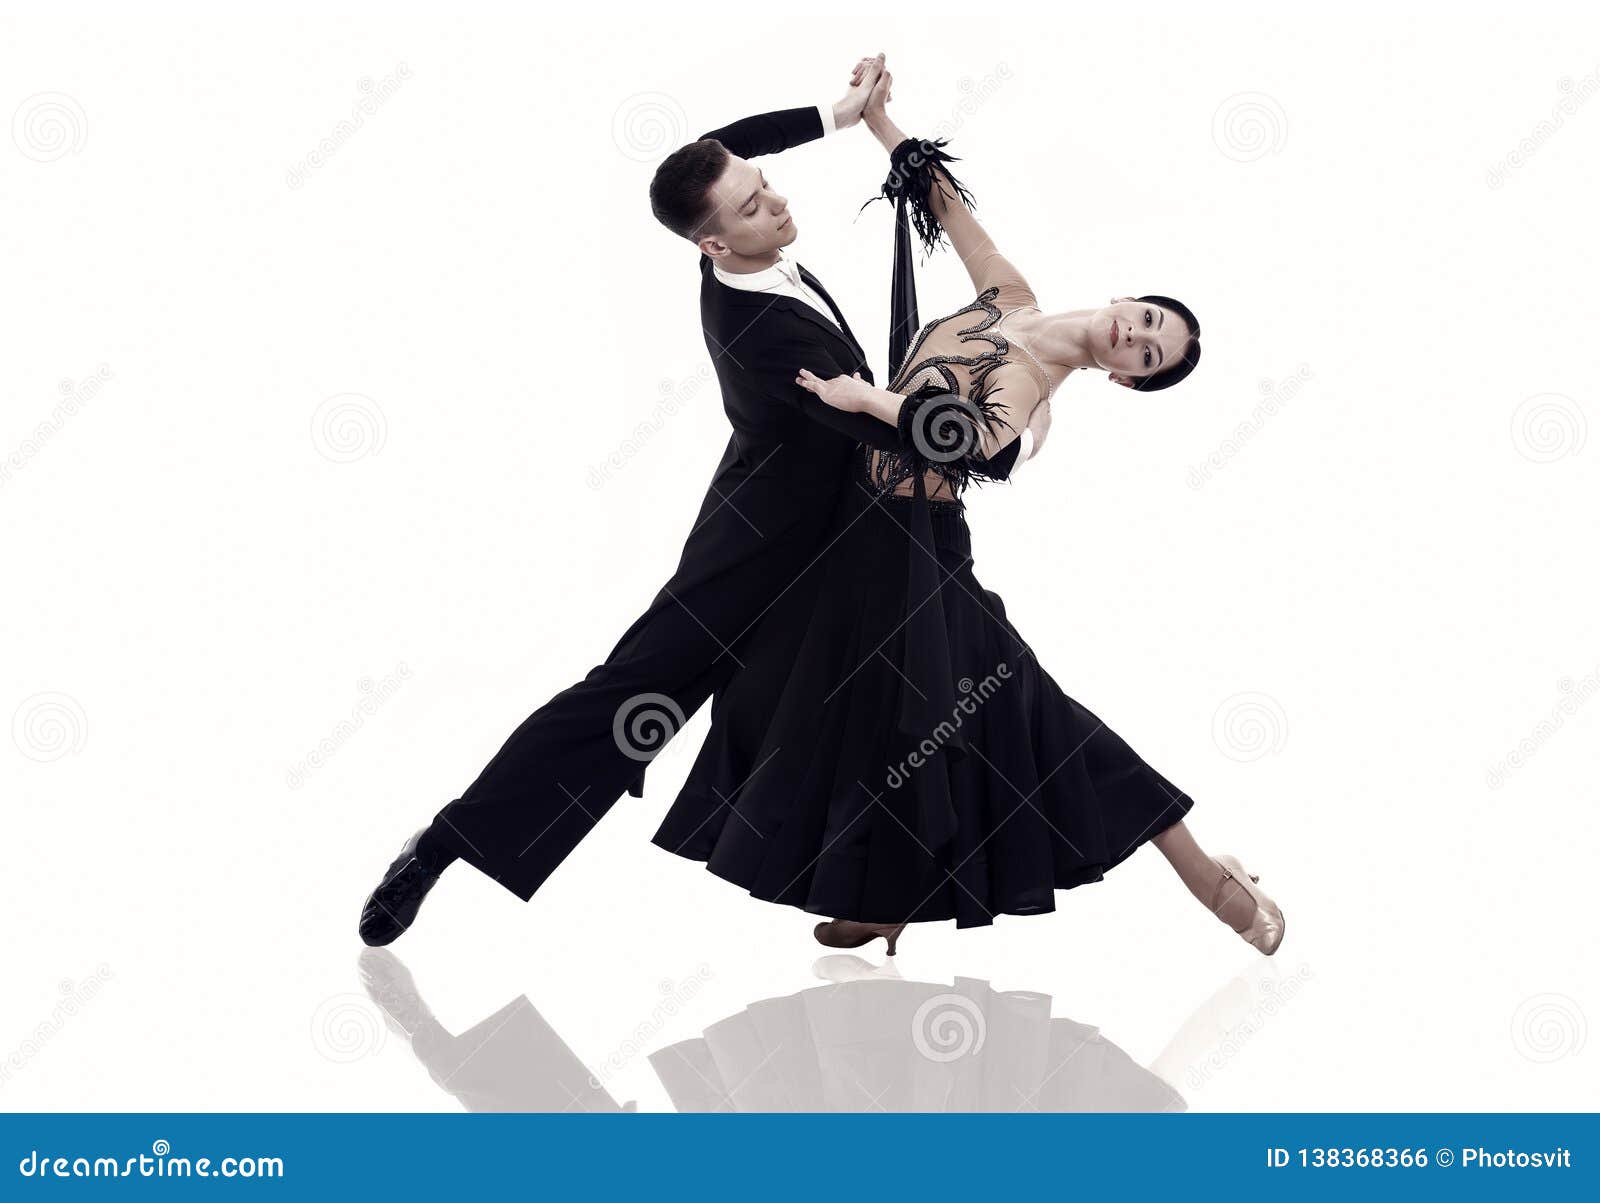 The Young Dance Ballroom Couple In Gold Dress Dancing In Sensual Pose On  Studio Background. Professional Dancers Dancing Tango. Ballroom Dance  Concept. Human Emotions - Love And Passion Stock Photo, Picture and